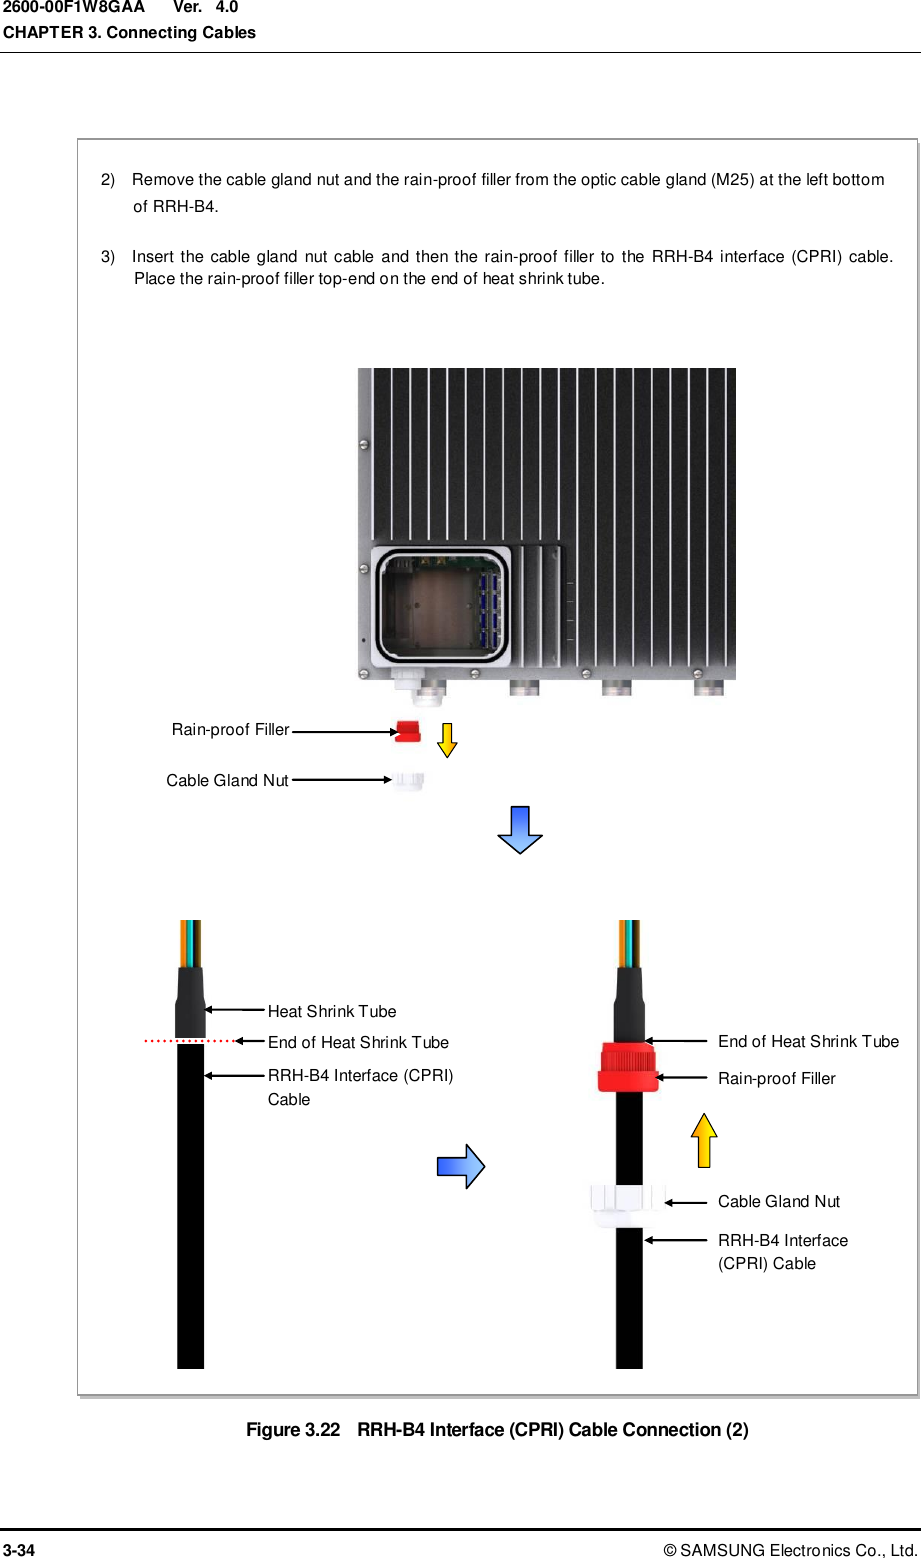  Ver.  CHAPTER 3. Connecting Cables 3-34 ©  SAMSUNG Electronics Co., Ltd. 2600-00F1W8GAA 4.0  Figure 3.22   RRH-B4 Interface (CPRI) Cable Connection (2) RRH-B4 Interface (CPRI)   Cable 2)    Remove the cable gland nut and the rain-proof filler from the optic cable gland (M25) at the left bottom of RRH-B4.  3)    Insert the cable gland  nut cable  and then the rain-proof filler to the  RRH-B4 interface (CPRI) cable. Place the rain-proof filler top-end on the end of heat shrink tube. Rain-proof Filler Cable Gland Nut End of Heat Shrink Tube Rain-proof Filler Cable Gland Nut Heat Shrink Tube End of Heat Shrink Tube RRH-B4 Interface (CPRI) Cable 